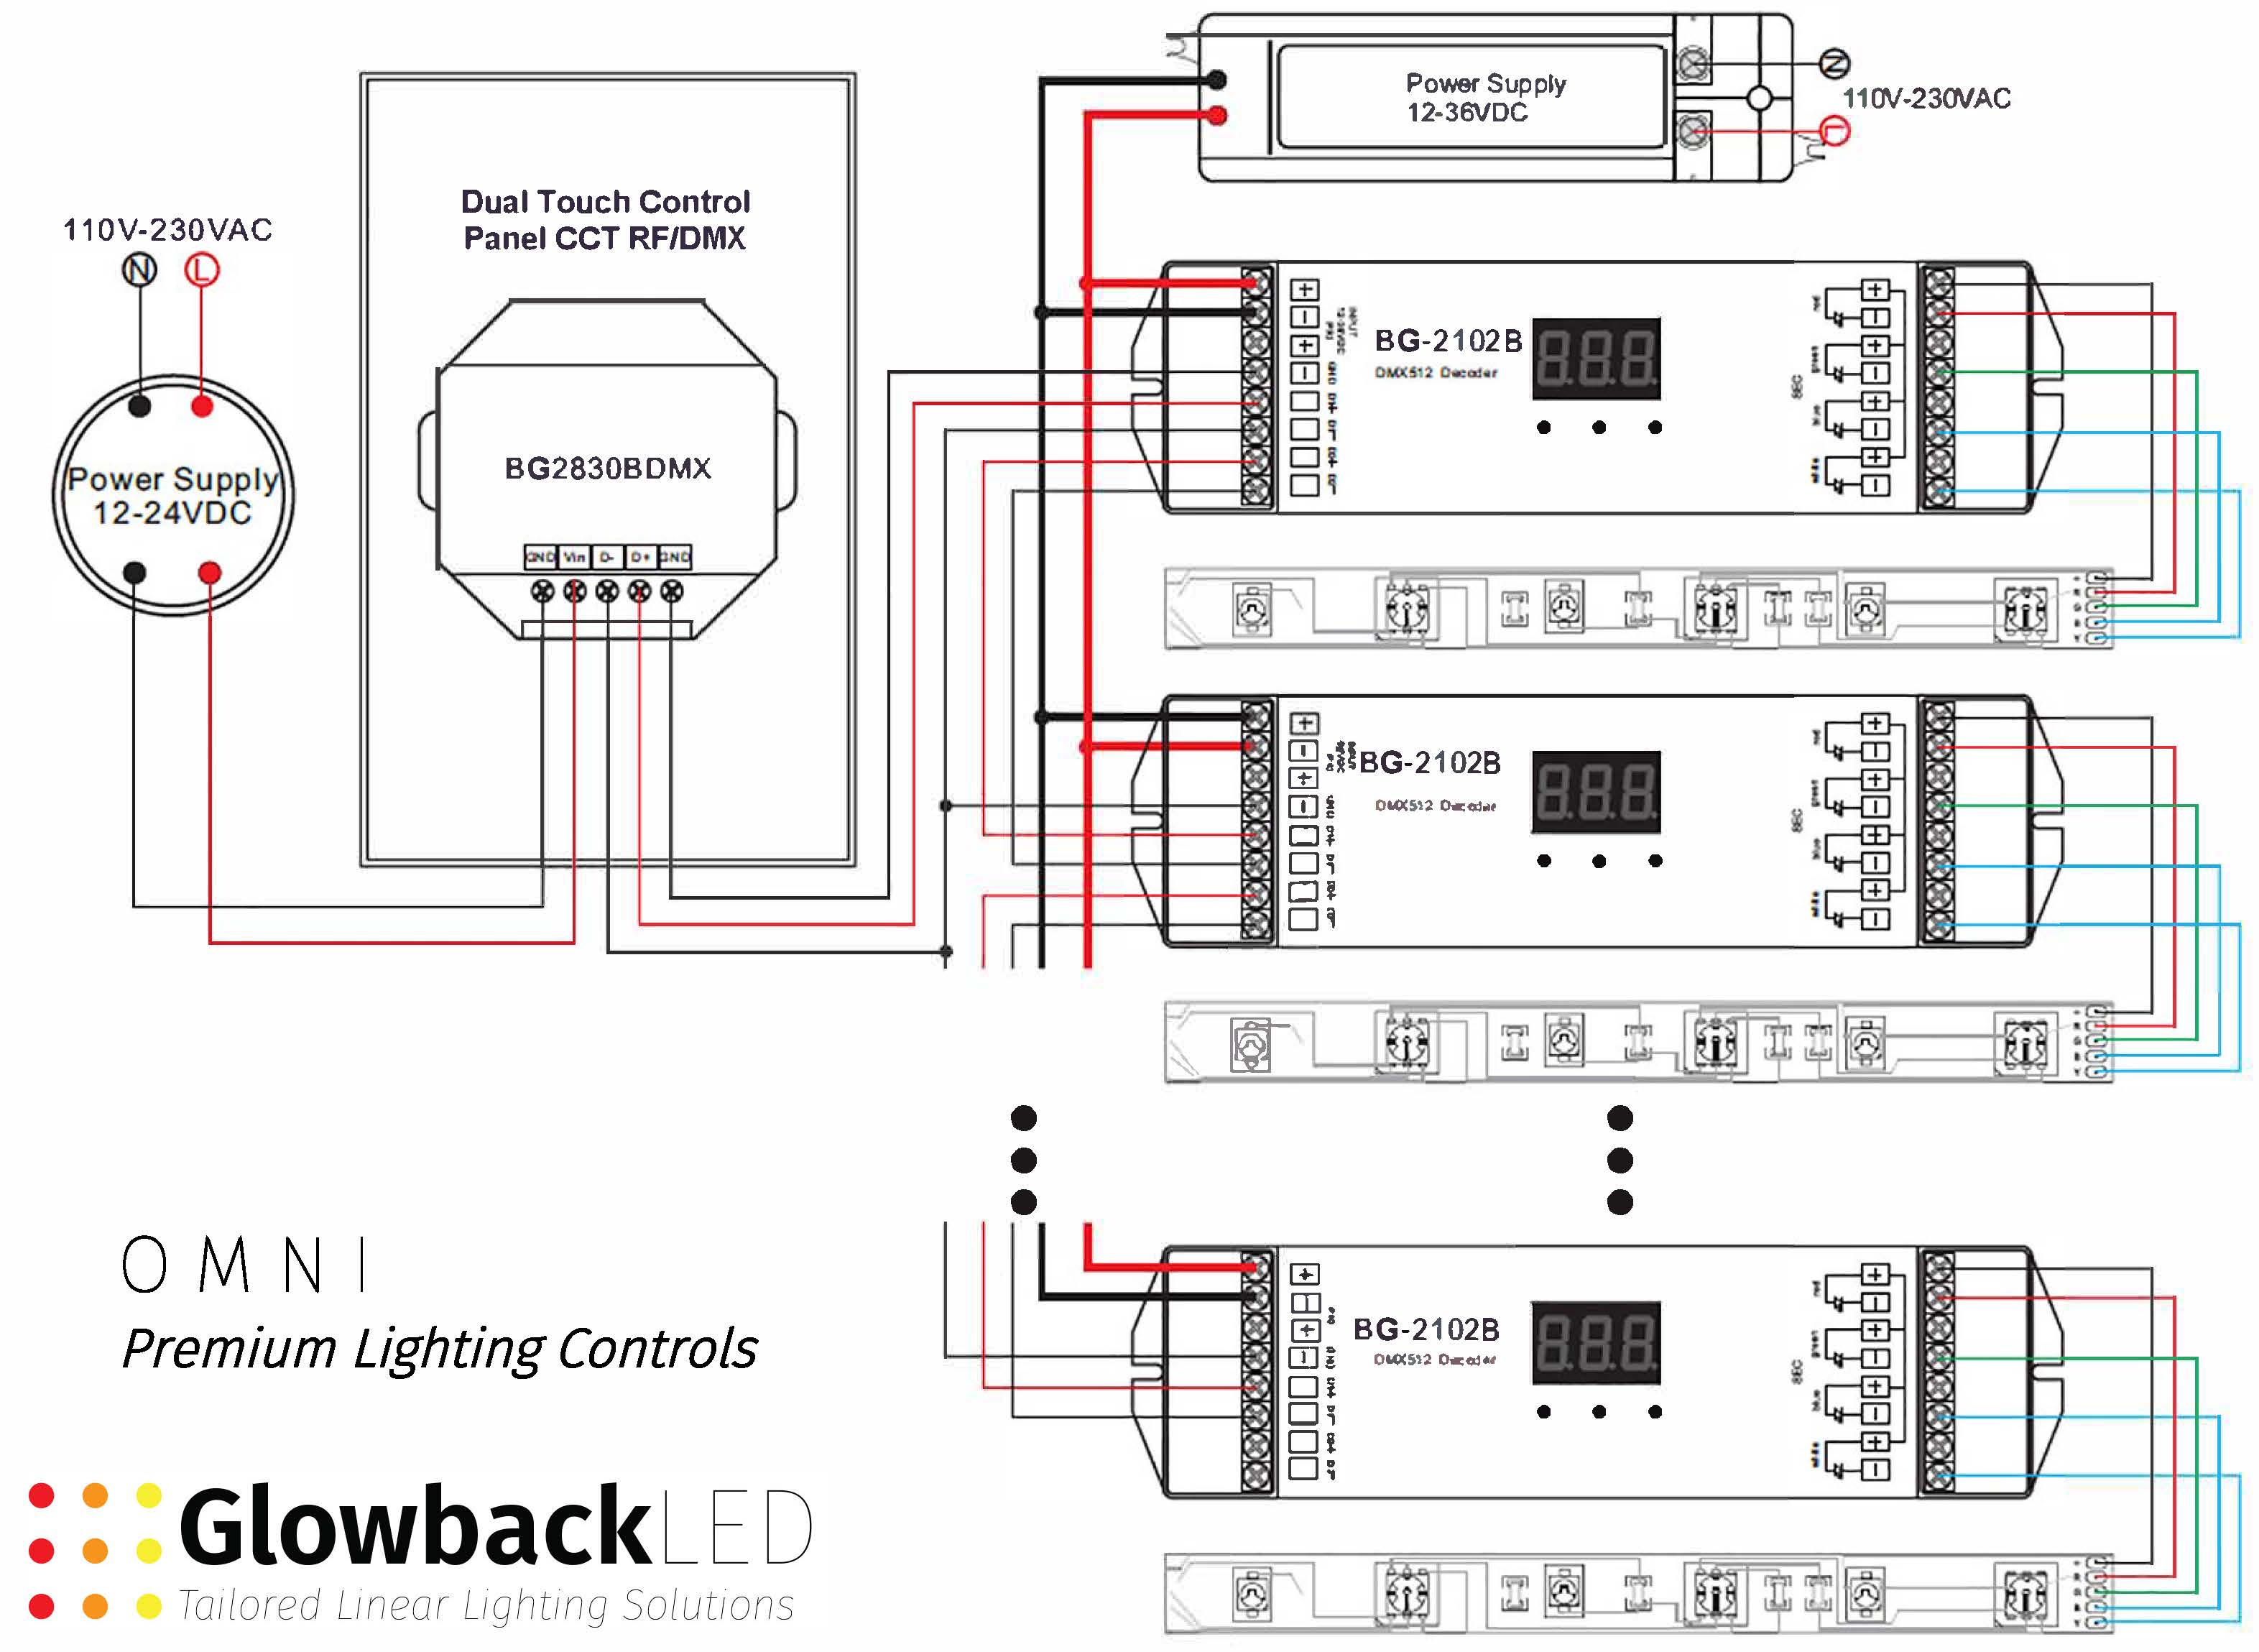 Wiring Diagram For Dmx Controllers